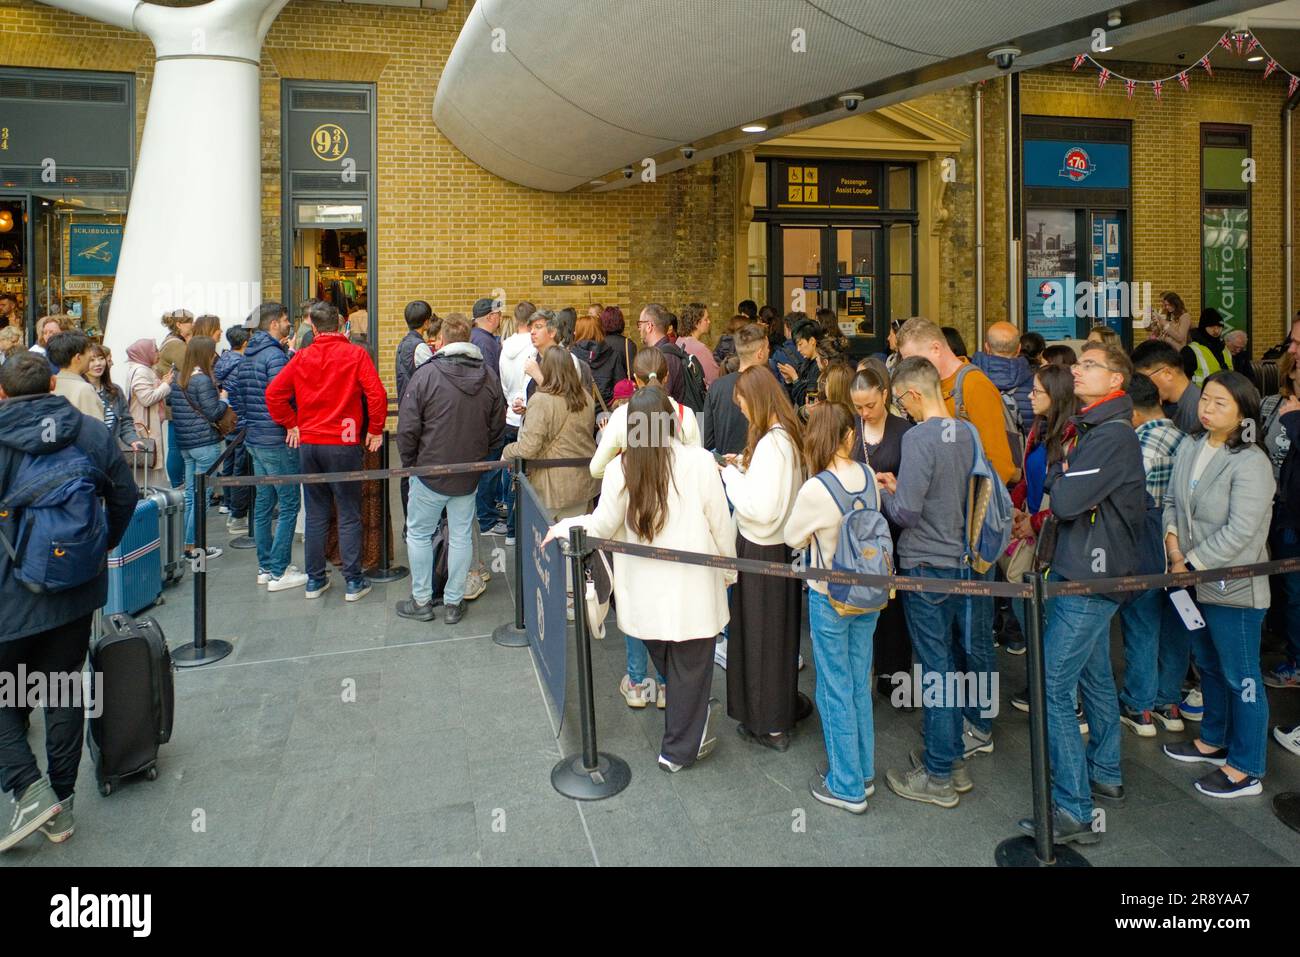 Long queue of people waiting to have their photo taken at Platform 9 3/4 in Kings Cross station Stock Photo